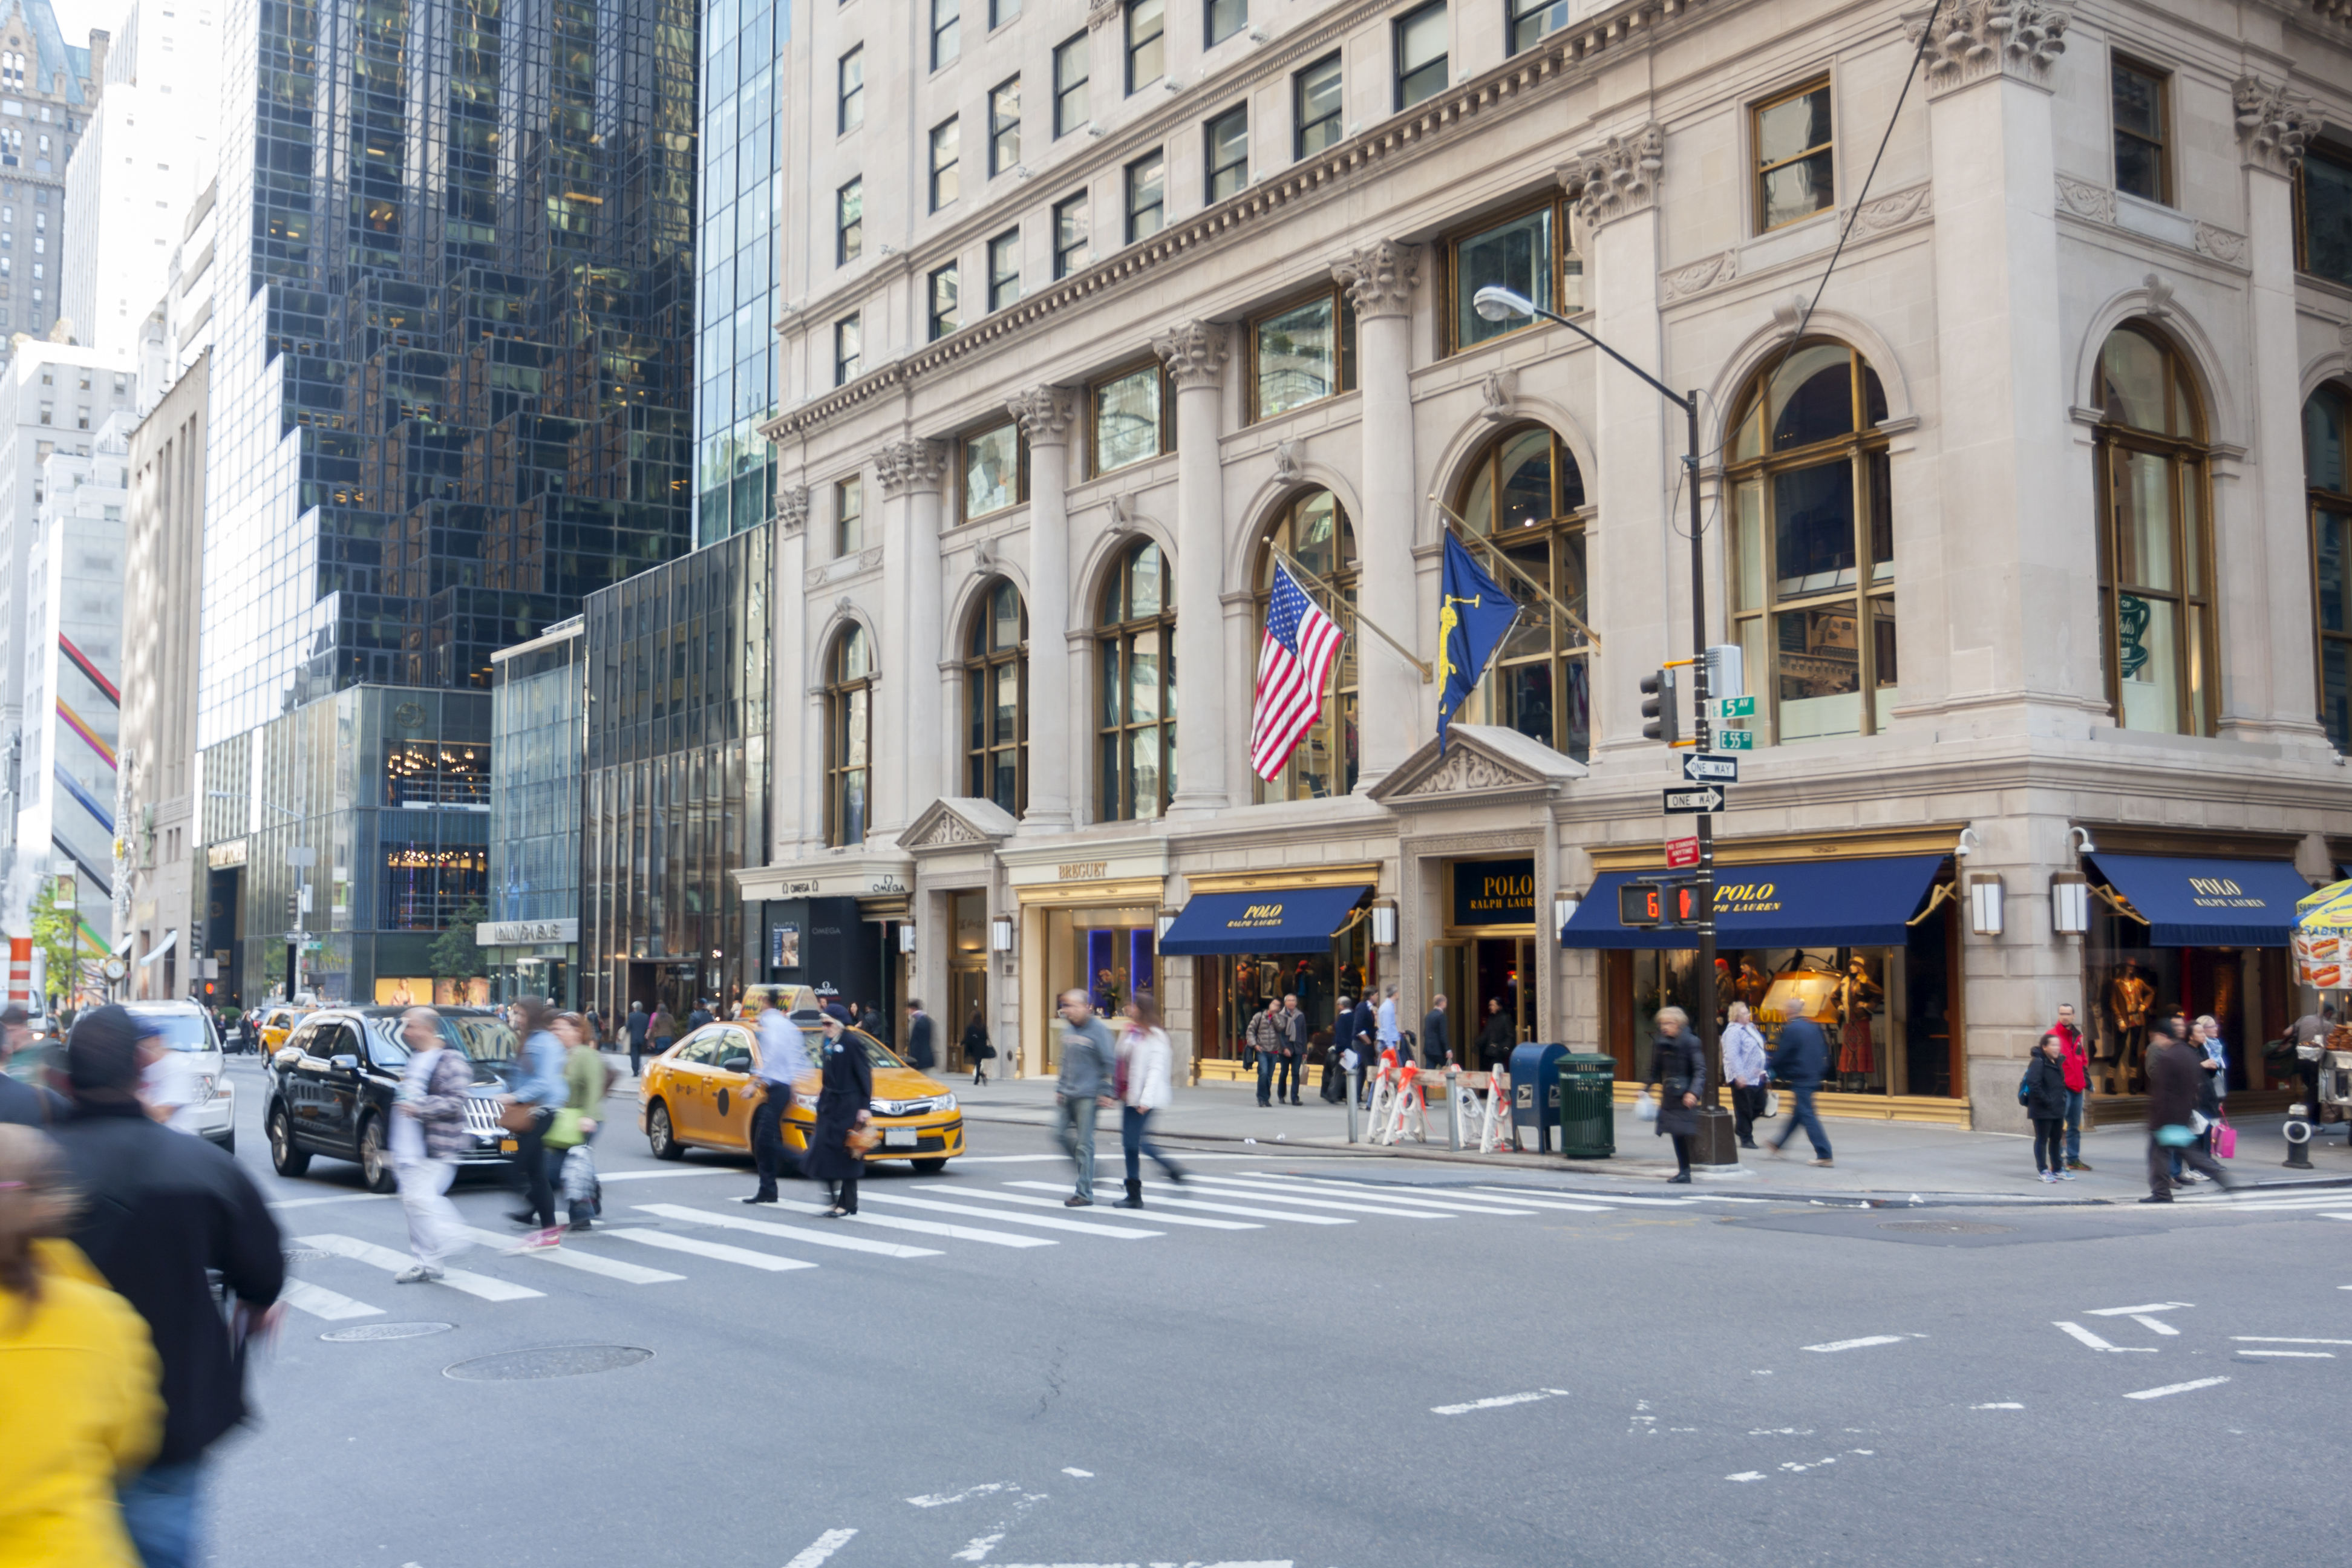 Ralph Lauren - The flagship store at 711 Fifth Avenue – and its